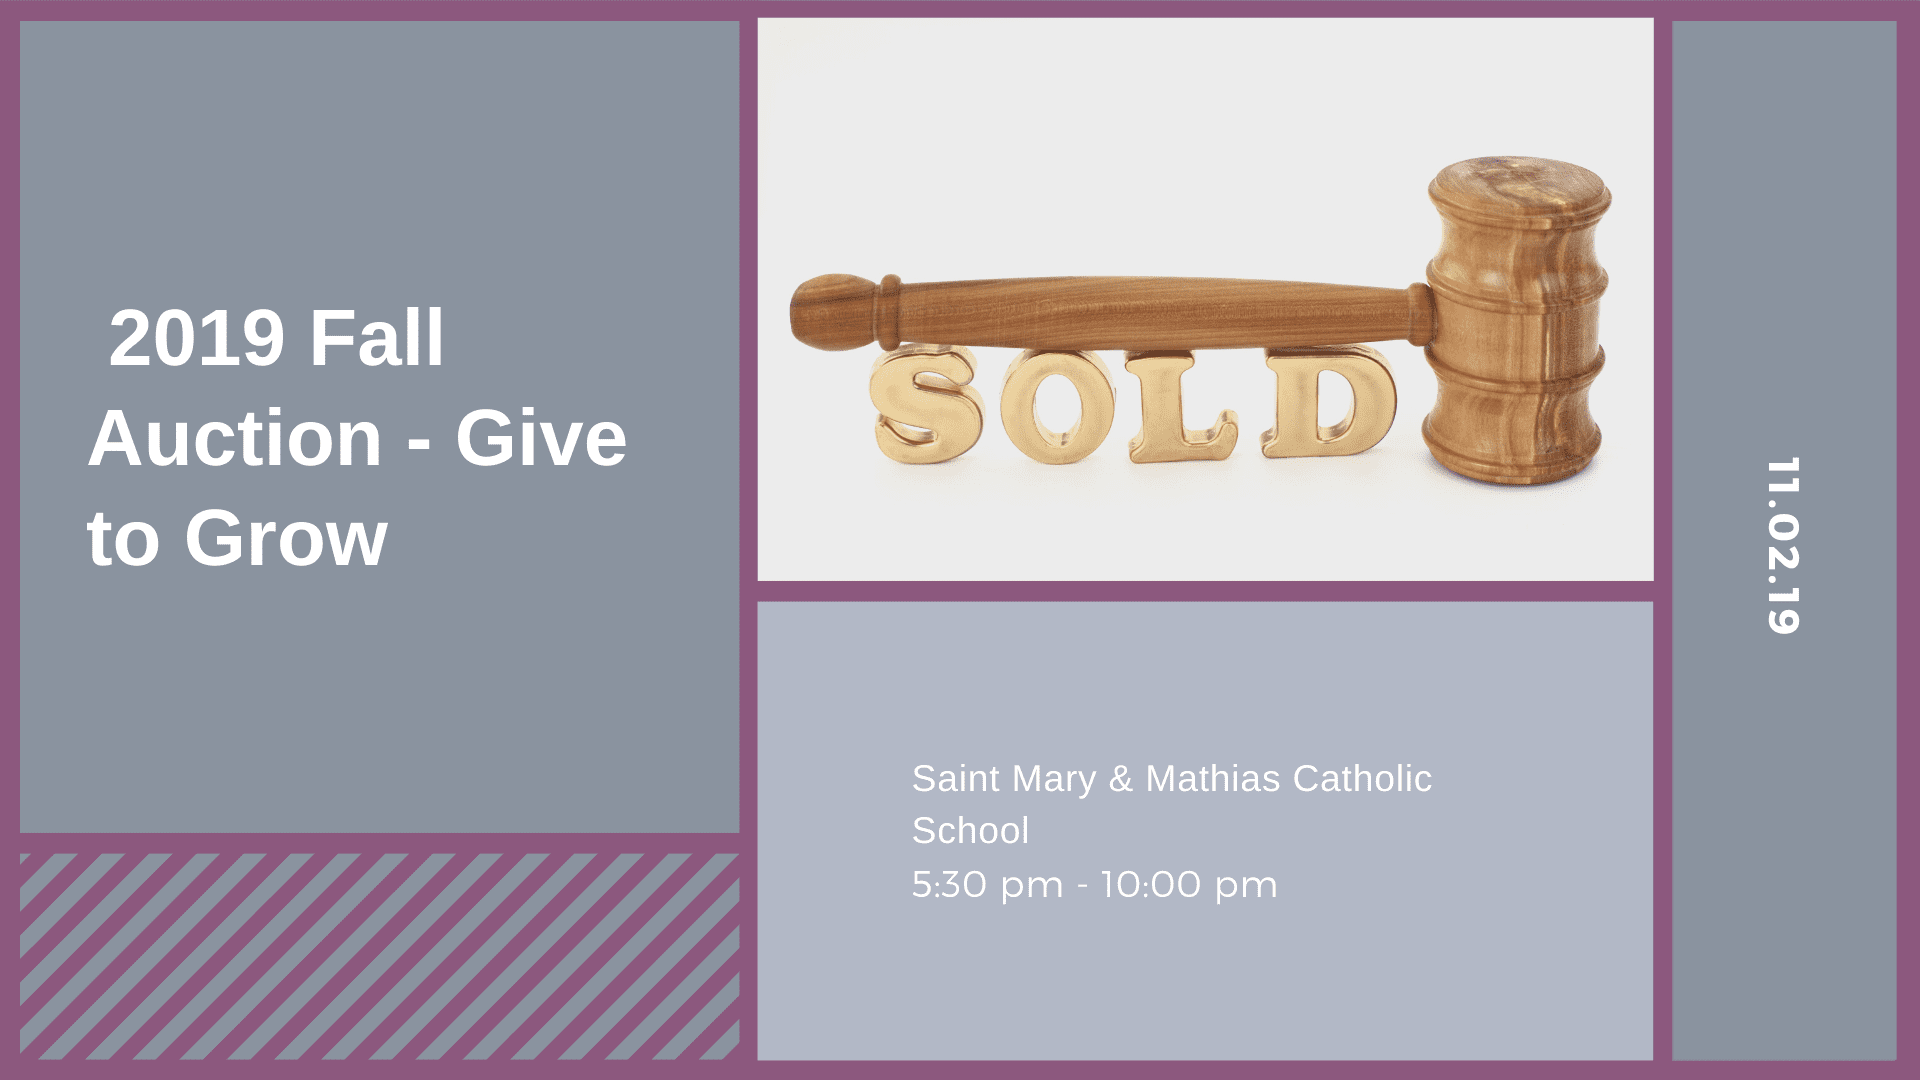 2019 Fall Auction - Give to Grow